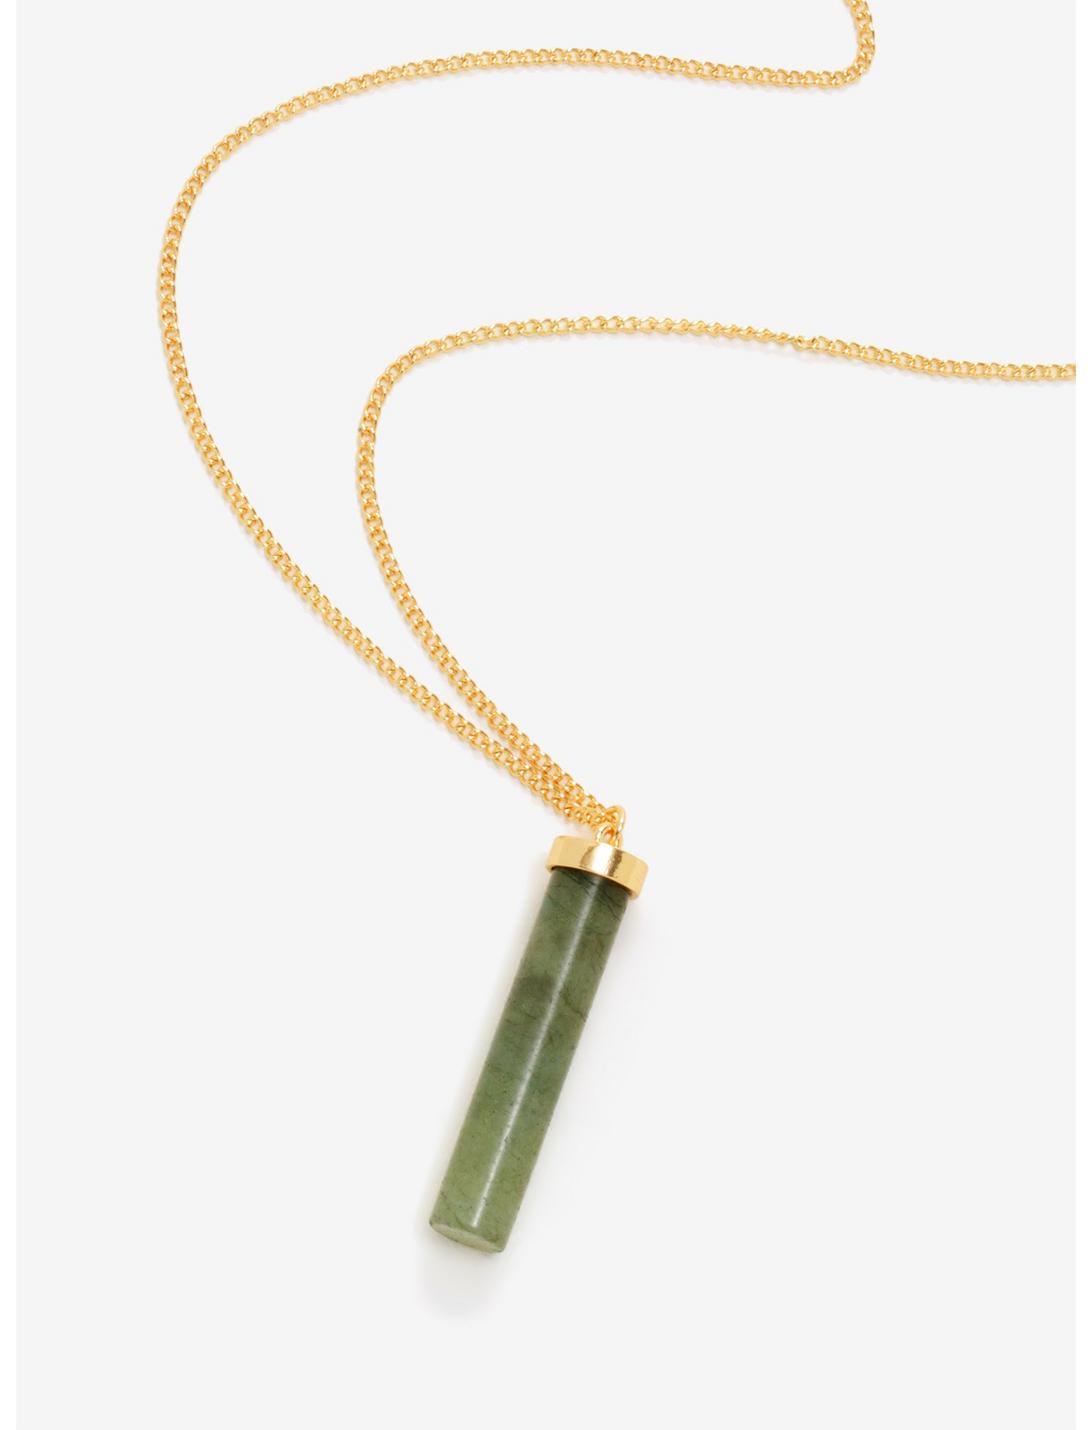 Moss Agate Long Chain Necklace, , hi-res